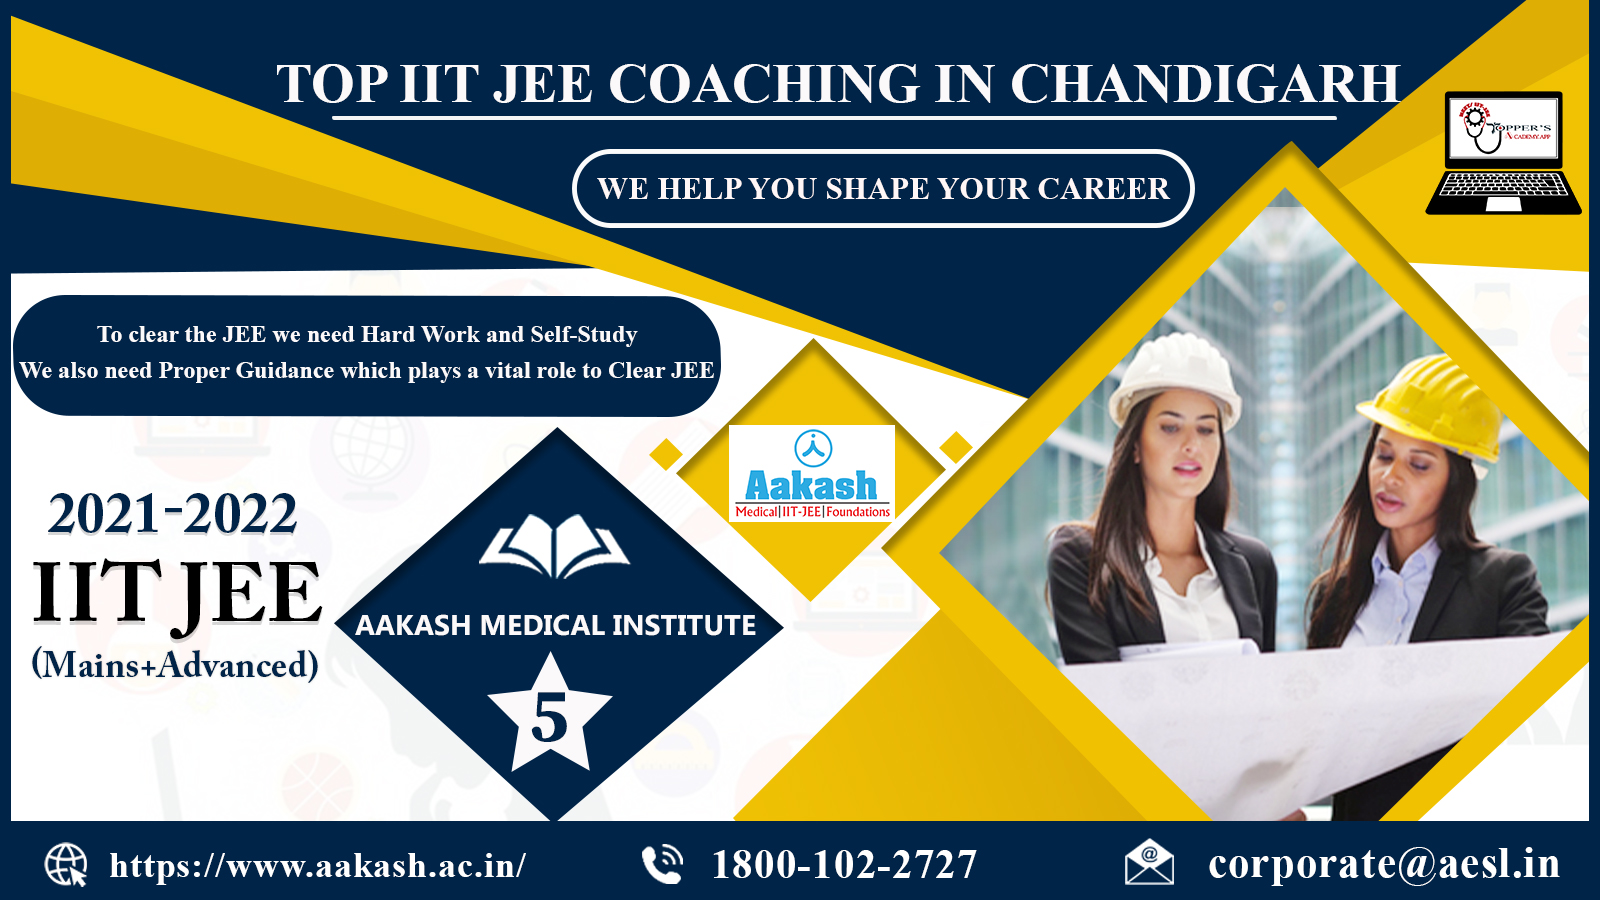 Best coaching for IIT JEE in chandigarh